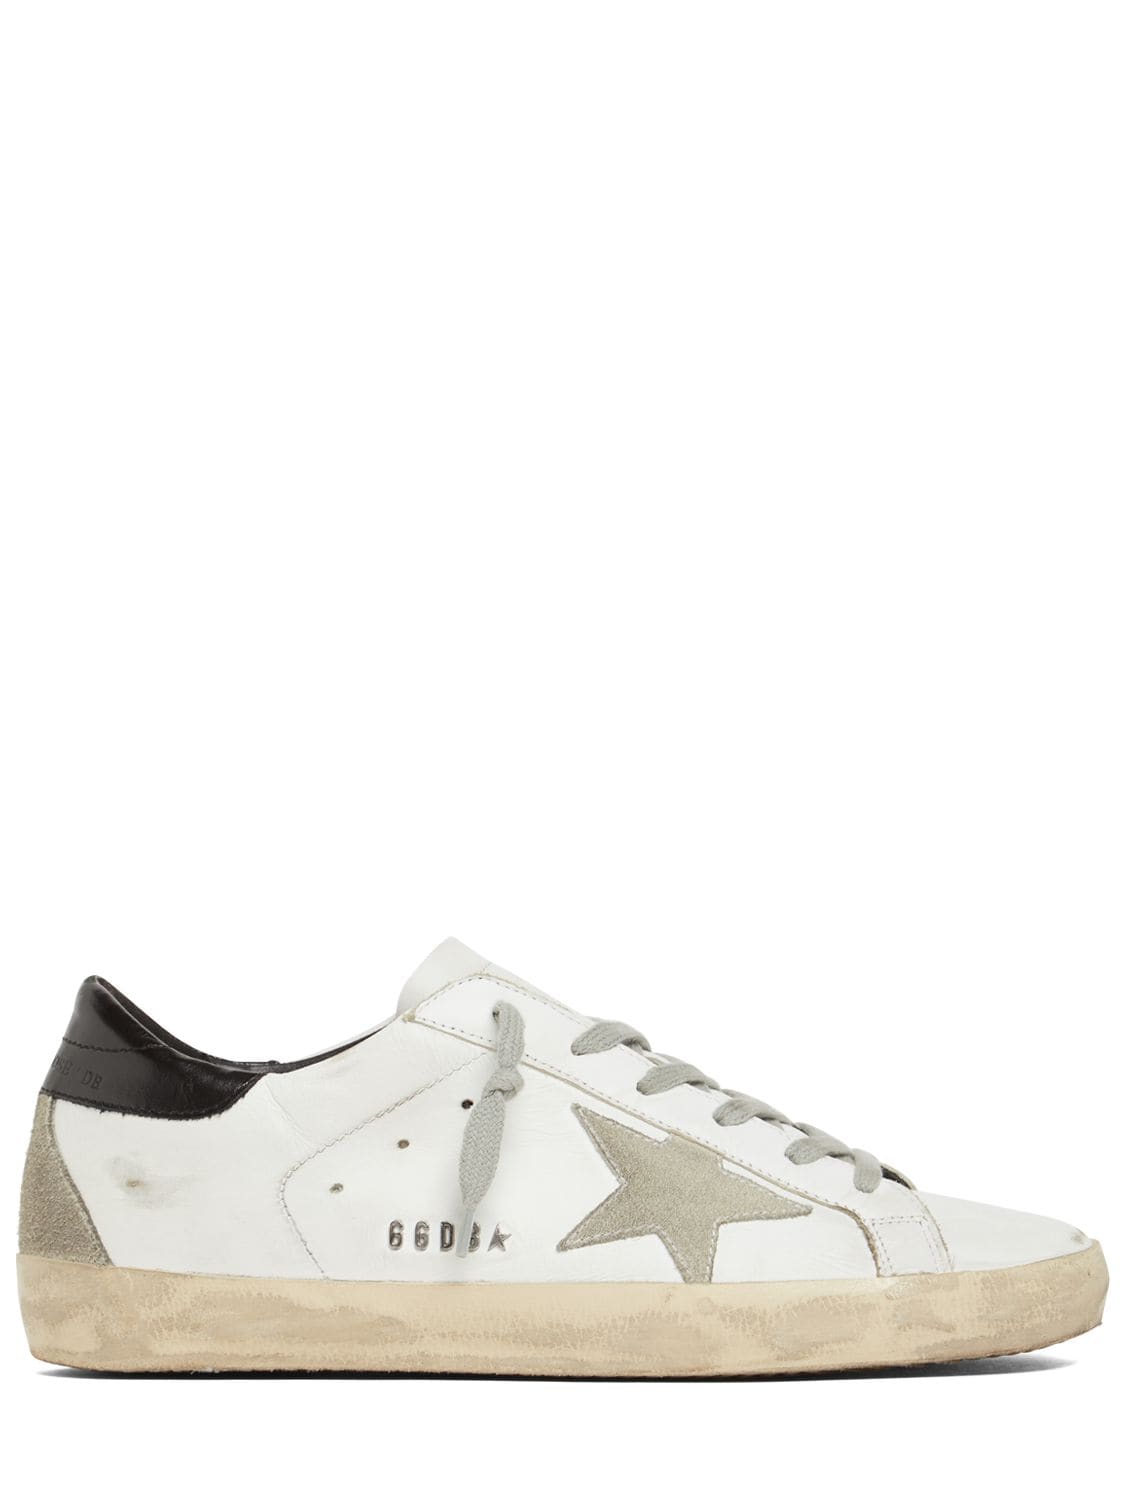 Golden Goose Suede Signature Leather Super Star Sneakers In White,grey